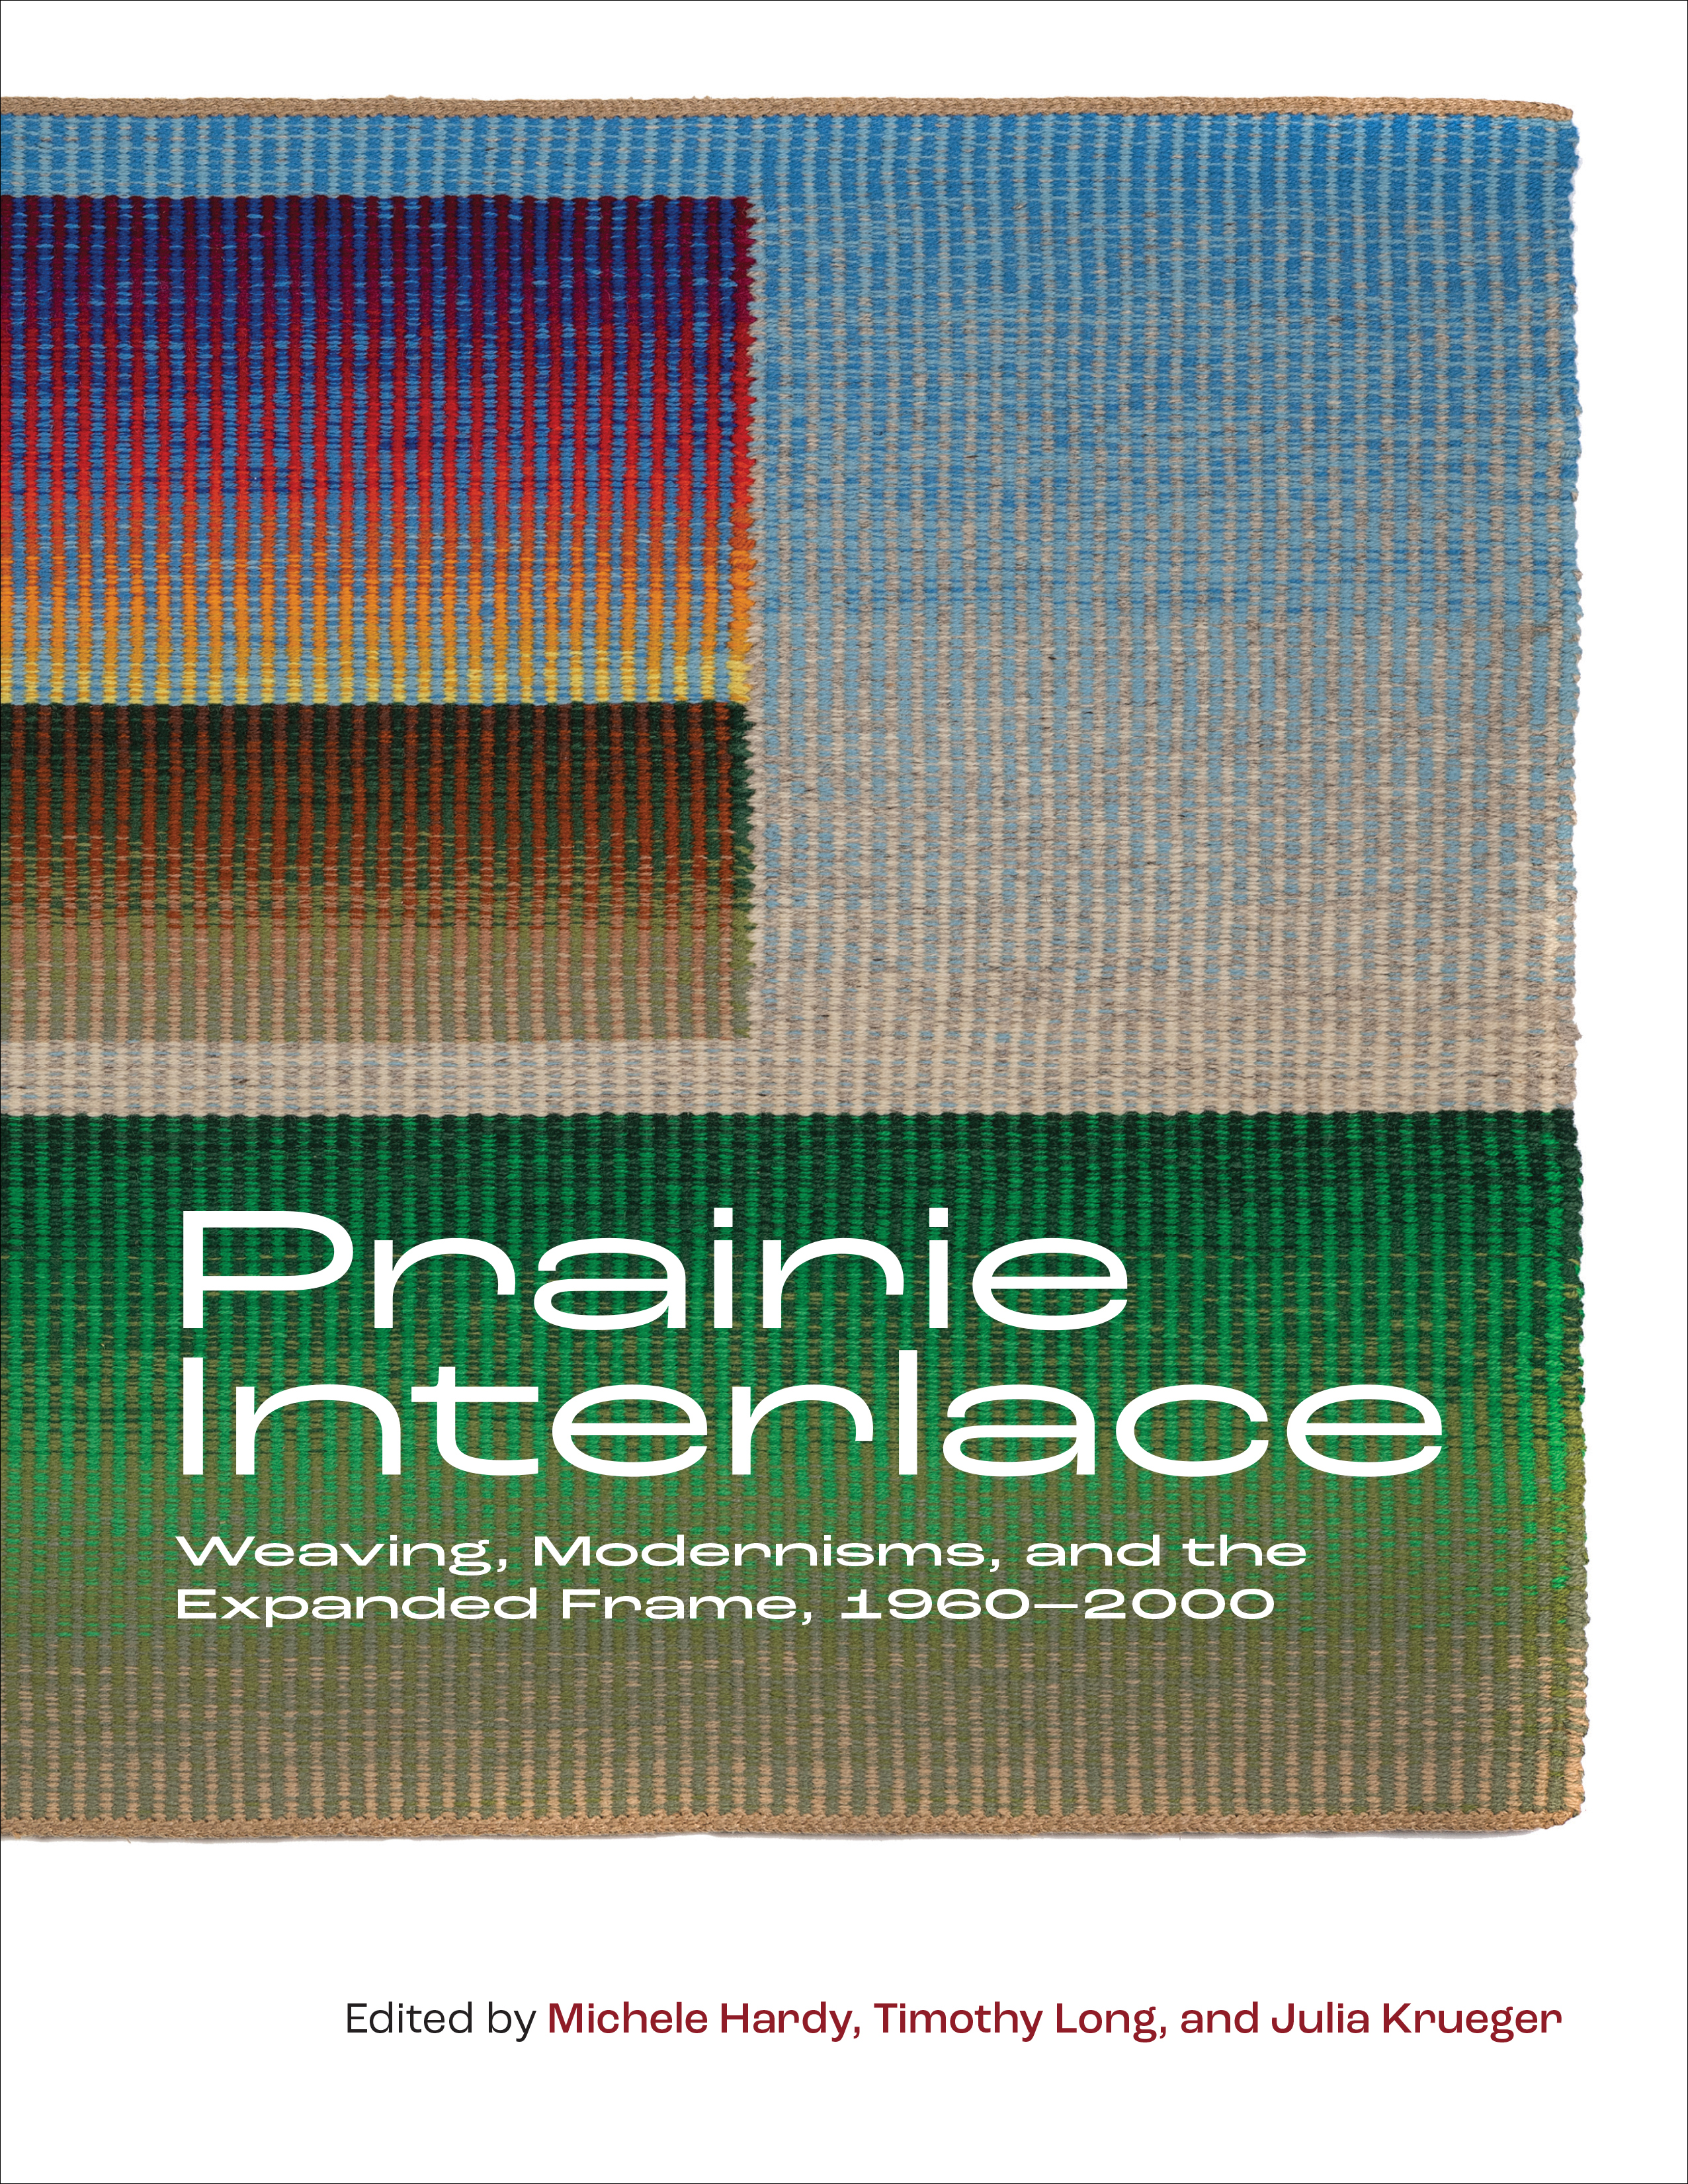 Book Cover Image for: Prairie Interlace